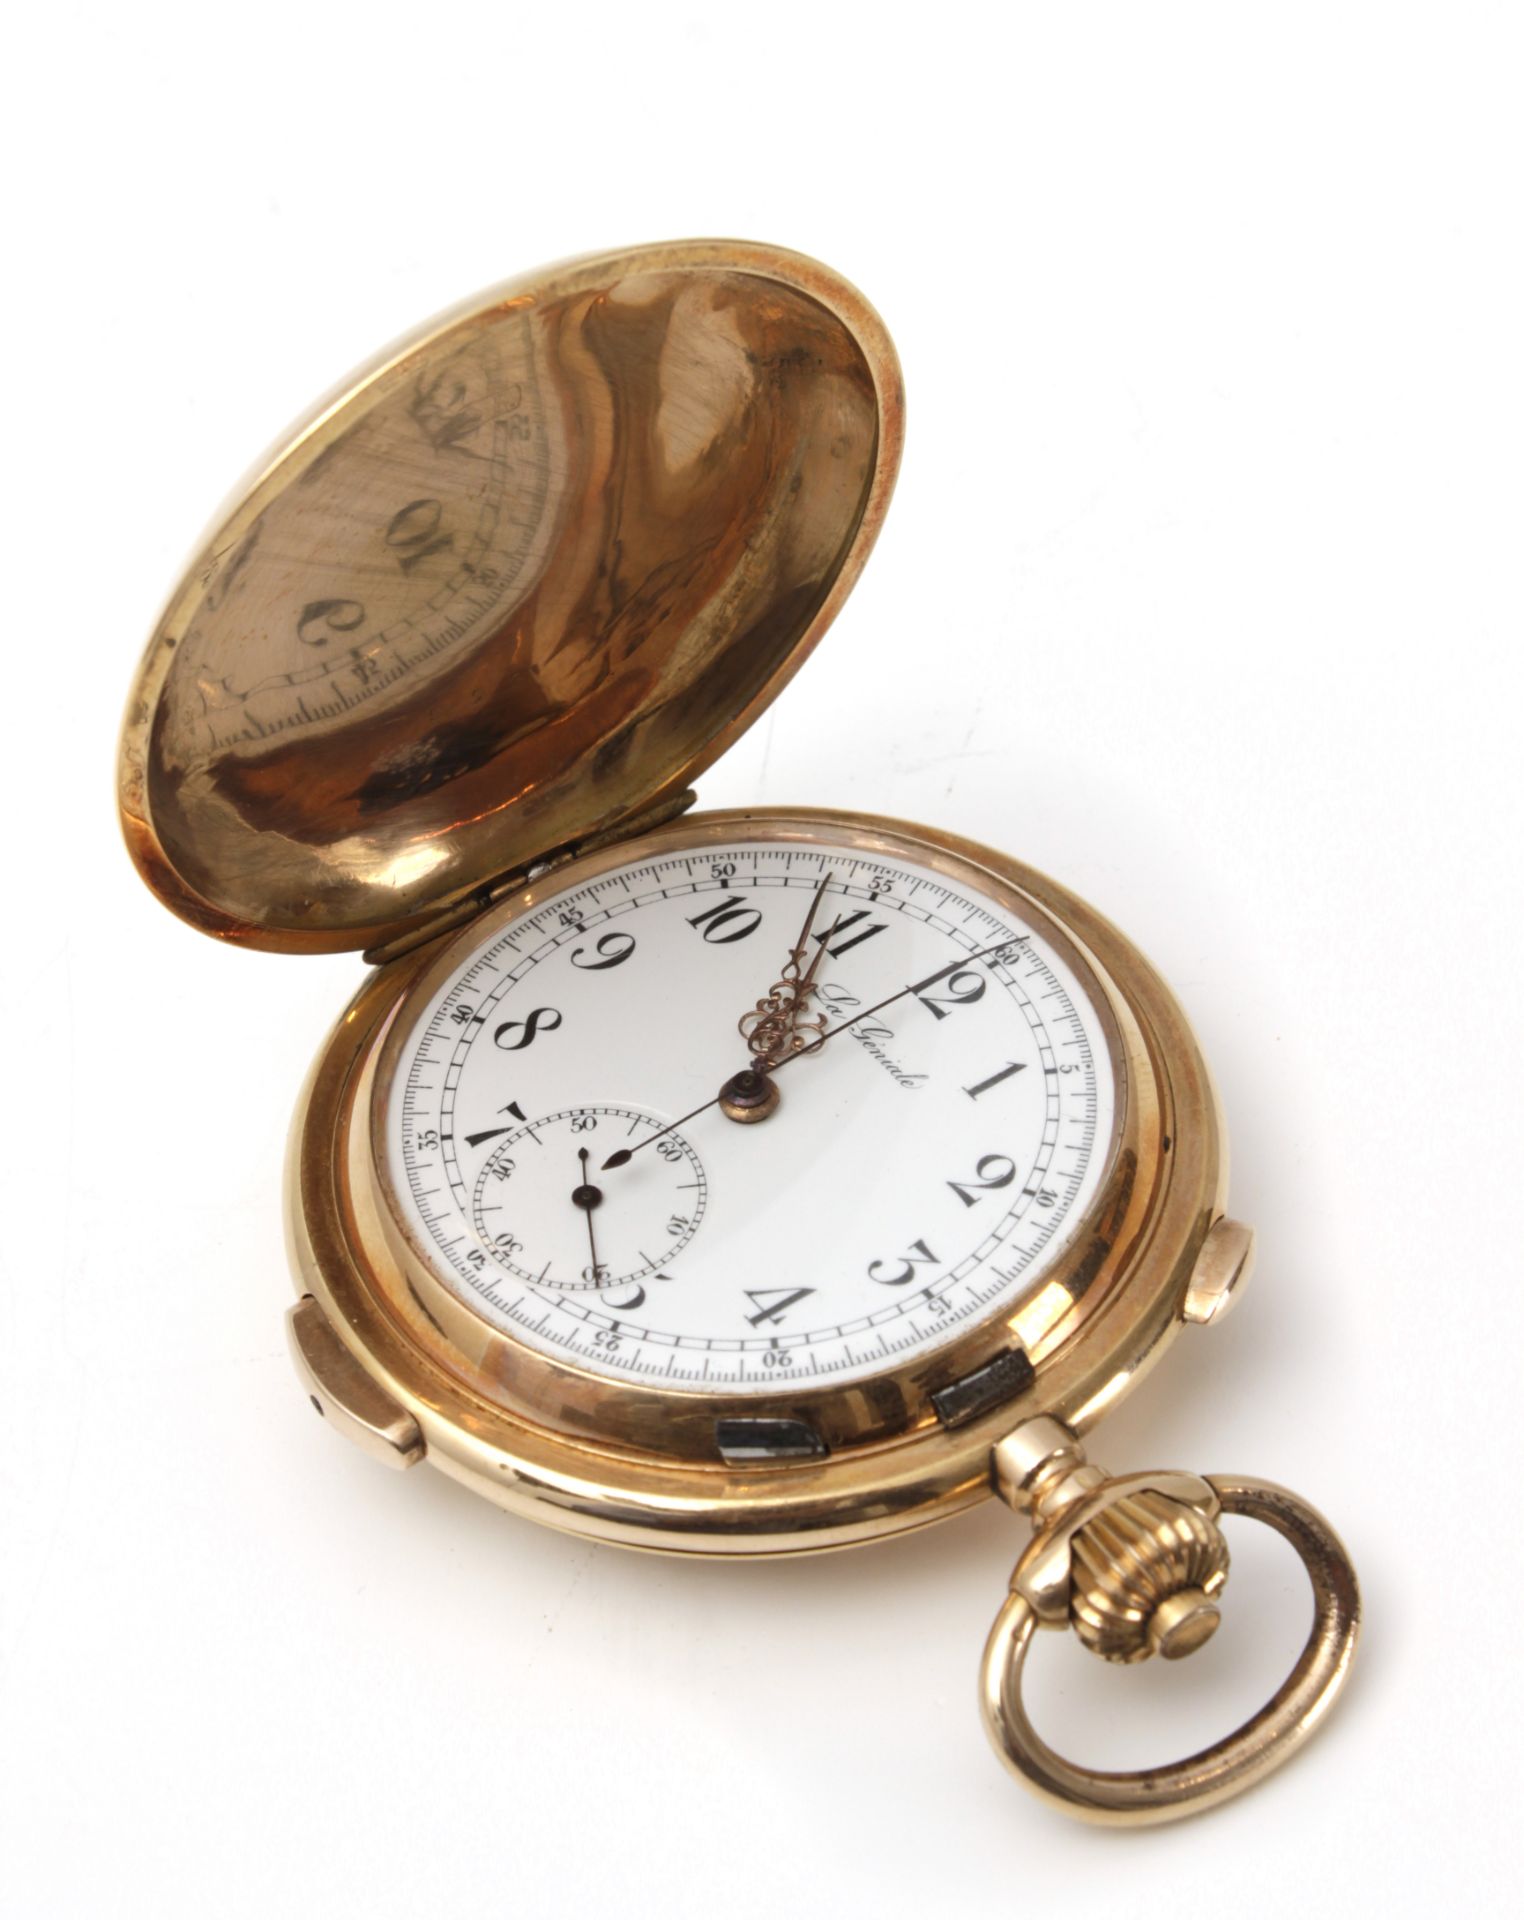 La Géniale. An 18k. yellow gold double hunter pocket watch circa 1900 with chronometer and chimes